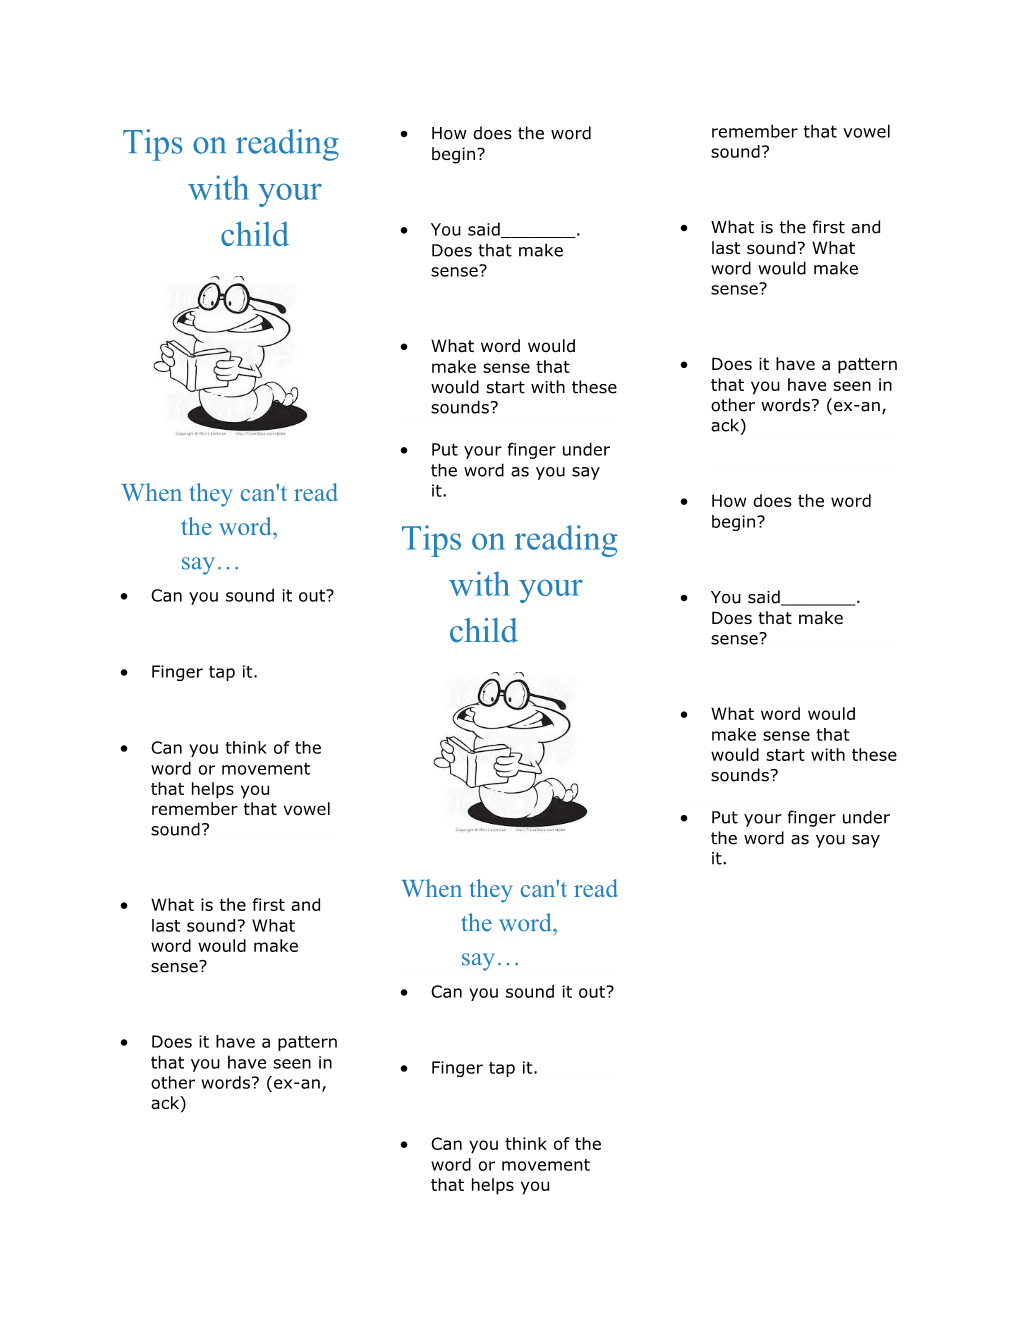 Tips on Reading with Your Child